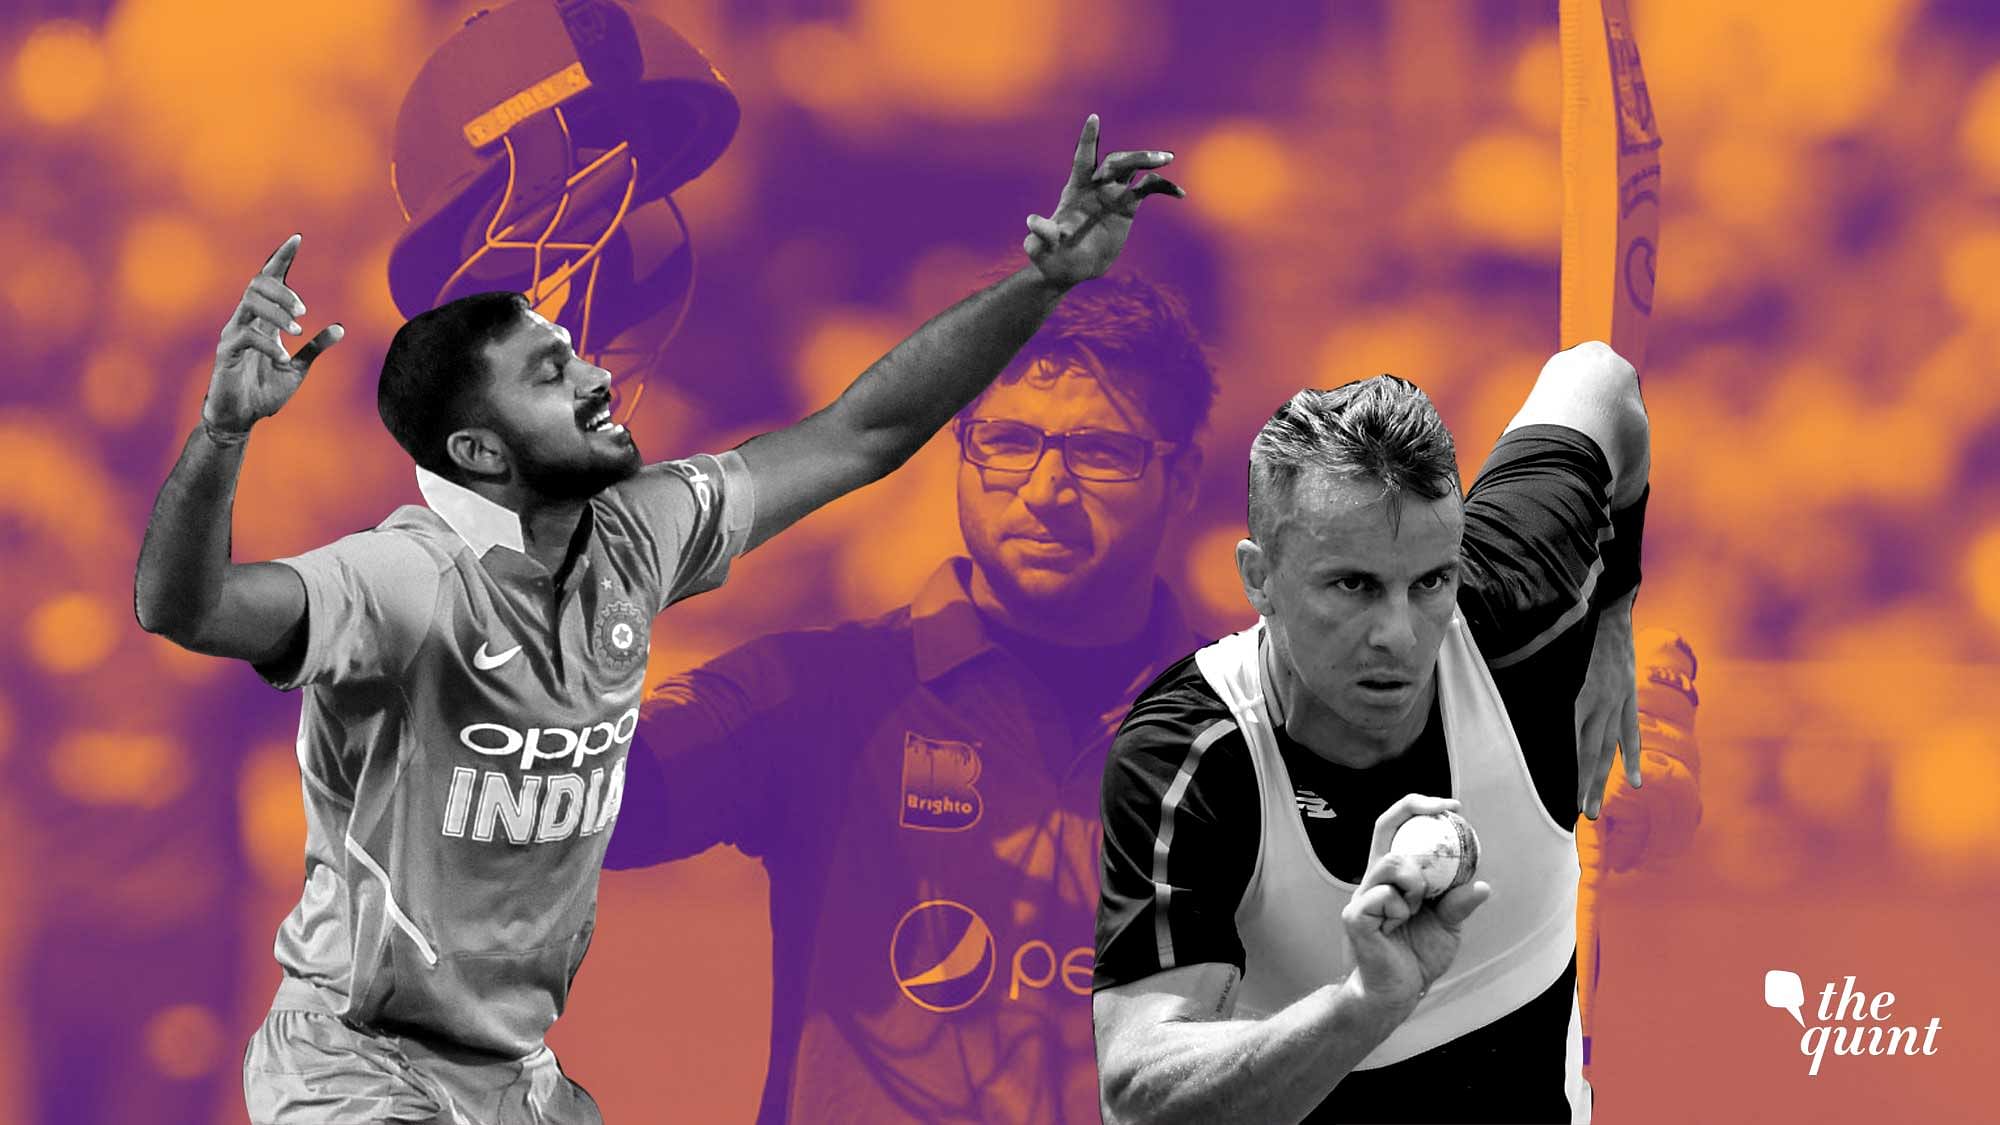 A look at 10 players who could step up for their teams and make a mark on the 2019 ICC World Cup.